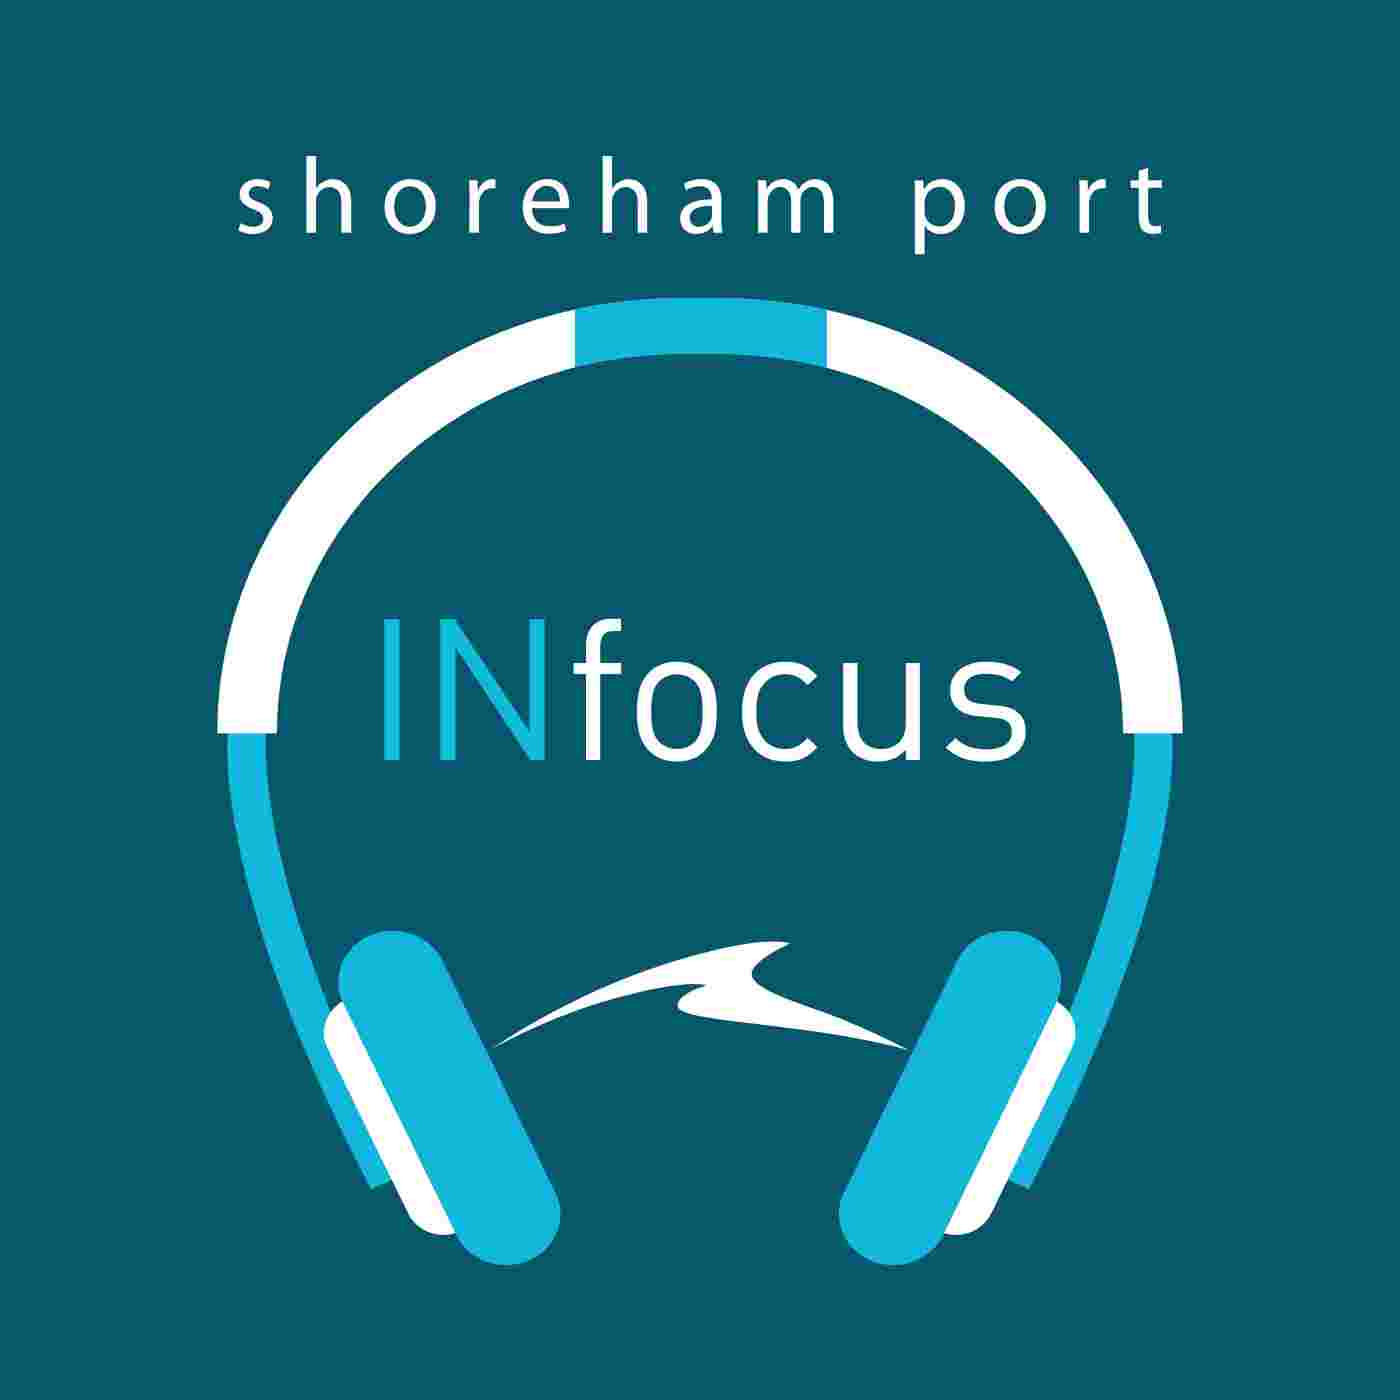 Episode #4: Meet the marines - Port insights with Julian Seaman and the tug team | Follow us @shoreham_port